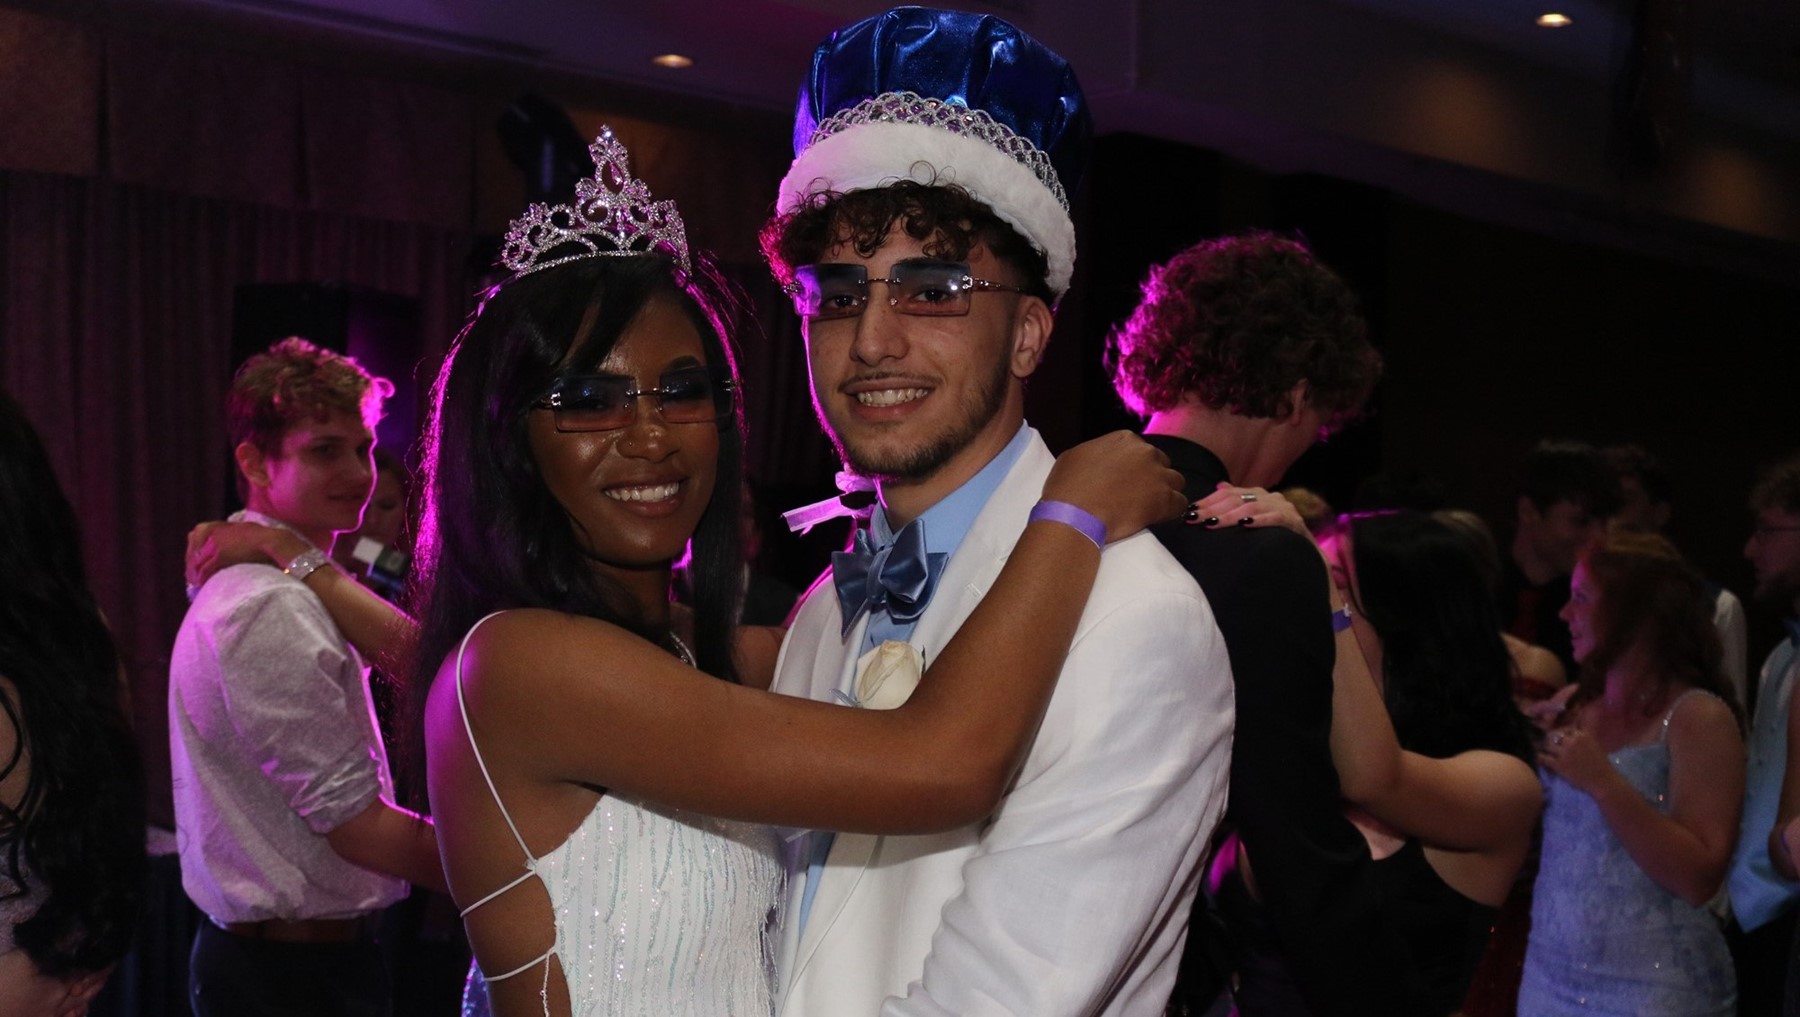 Congrats to Tavi Thompson and Tony Fox for being crowned Prom King and Queen!